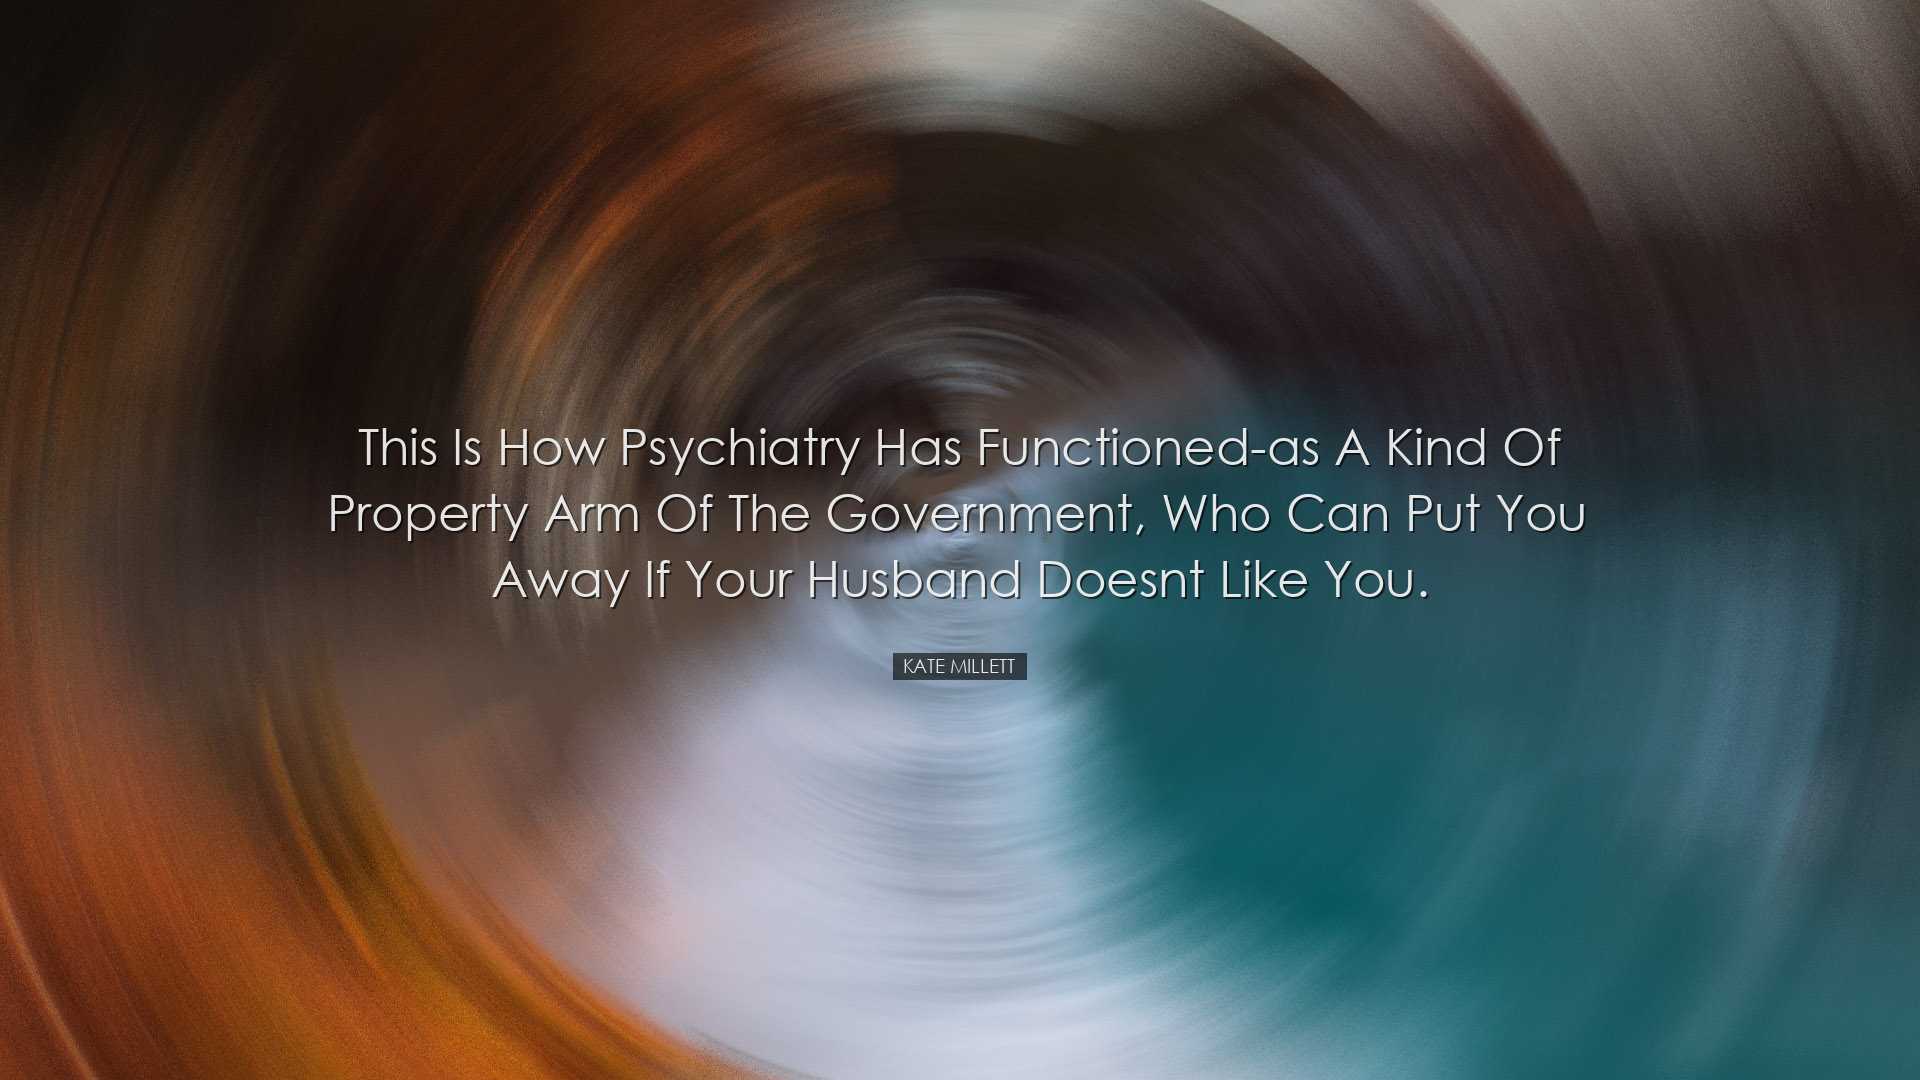 This is how psychiatry has functioned-as a kind of property arm of